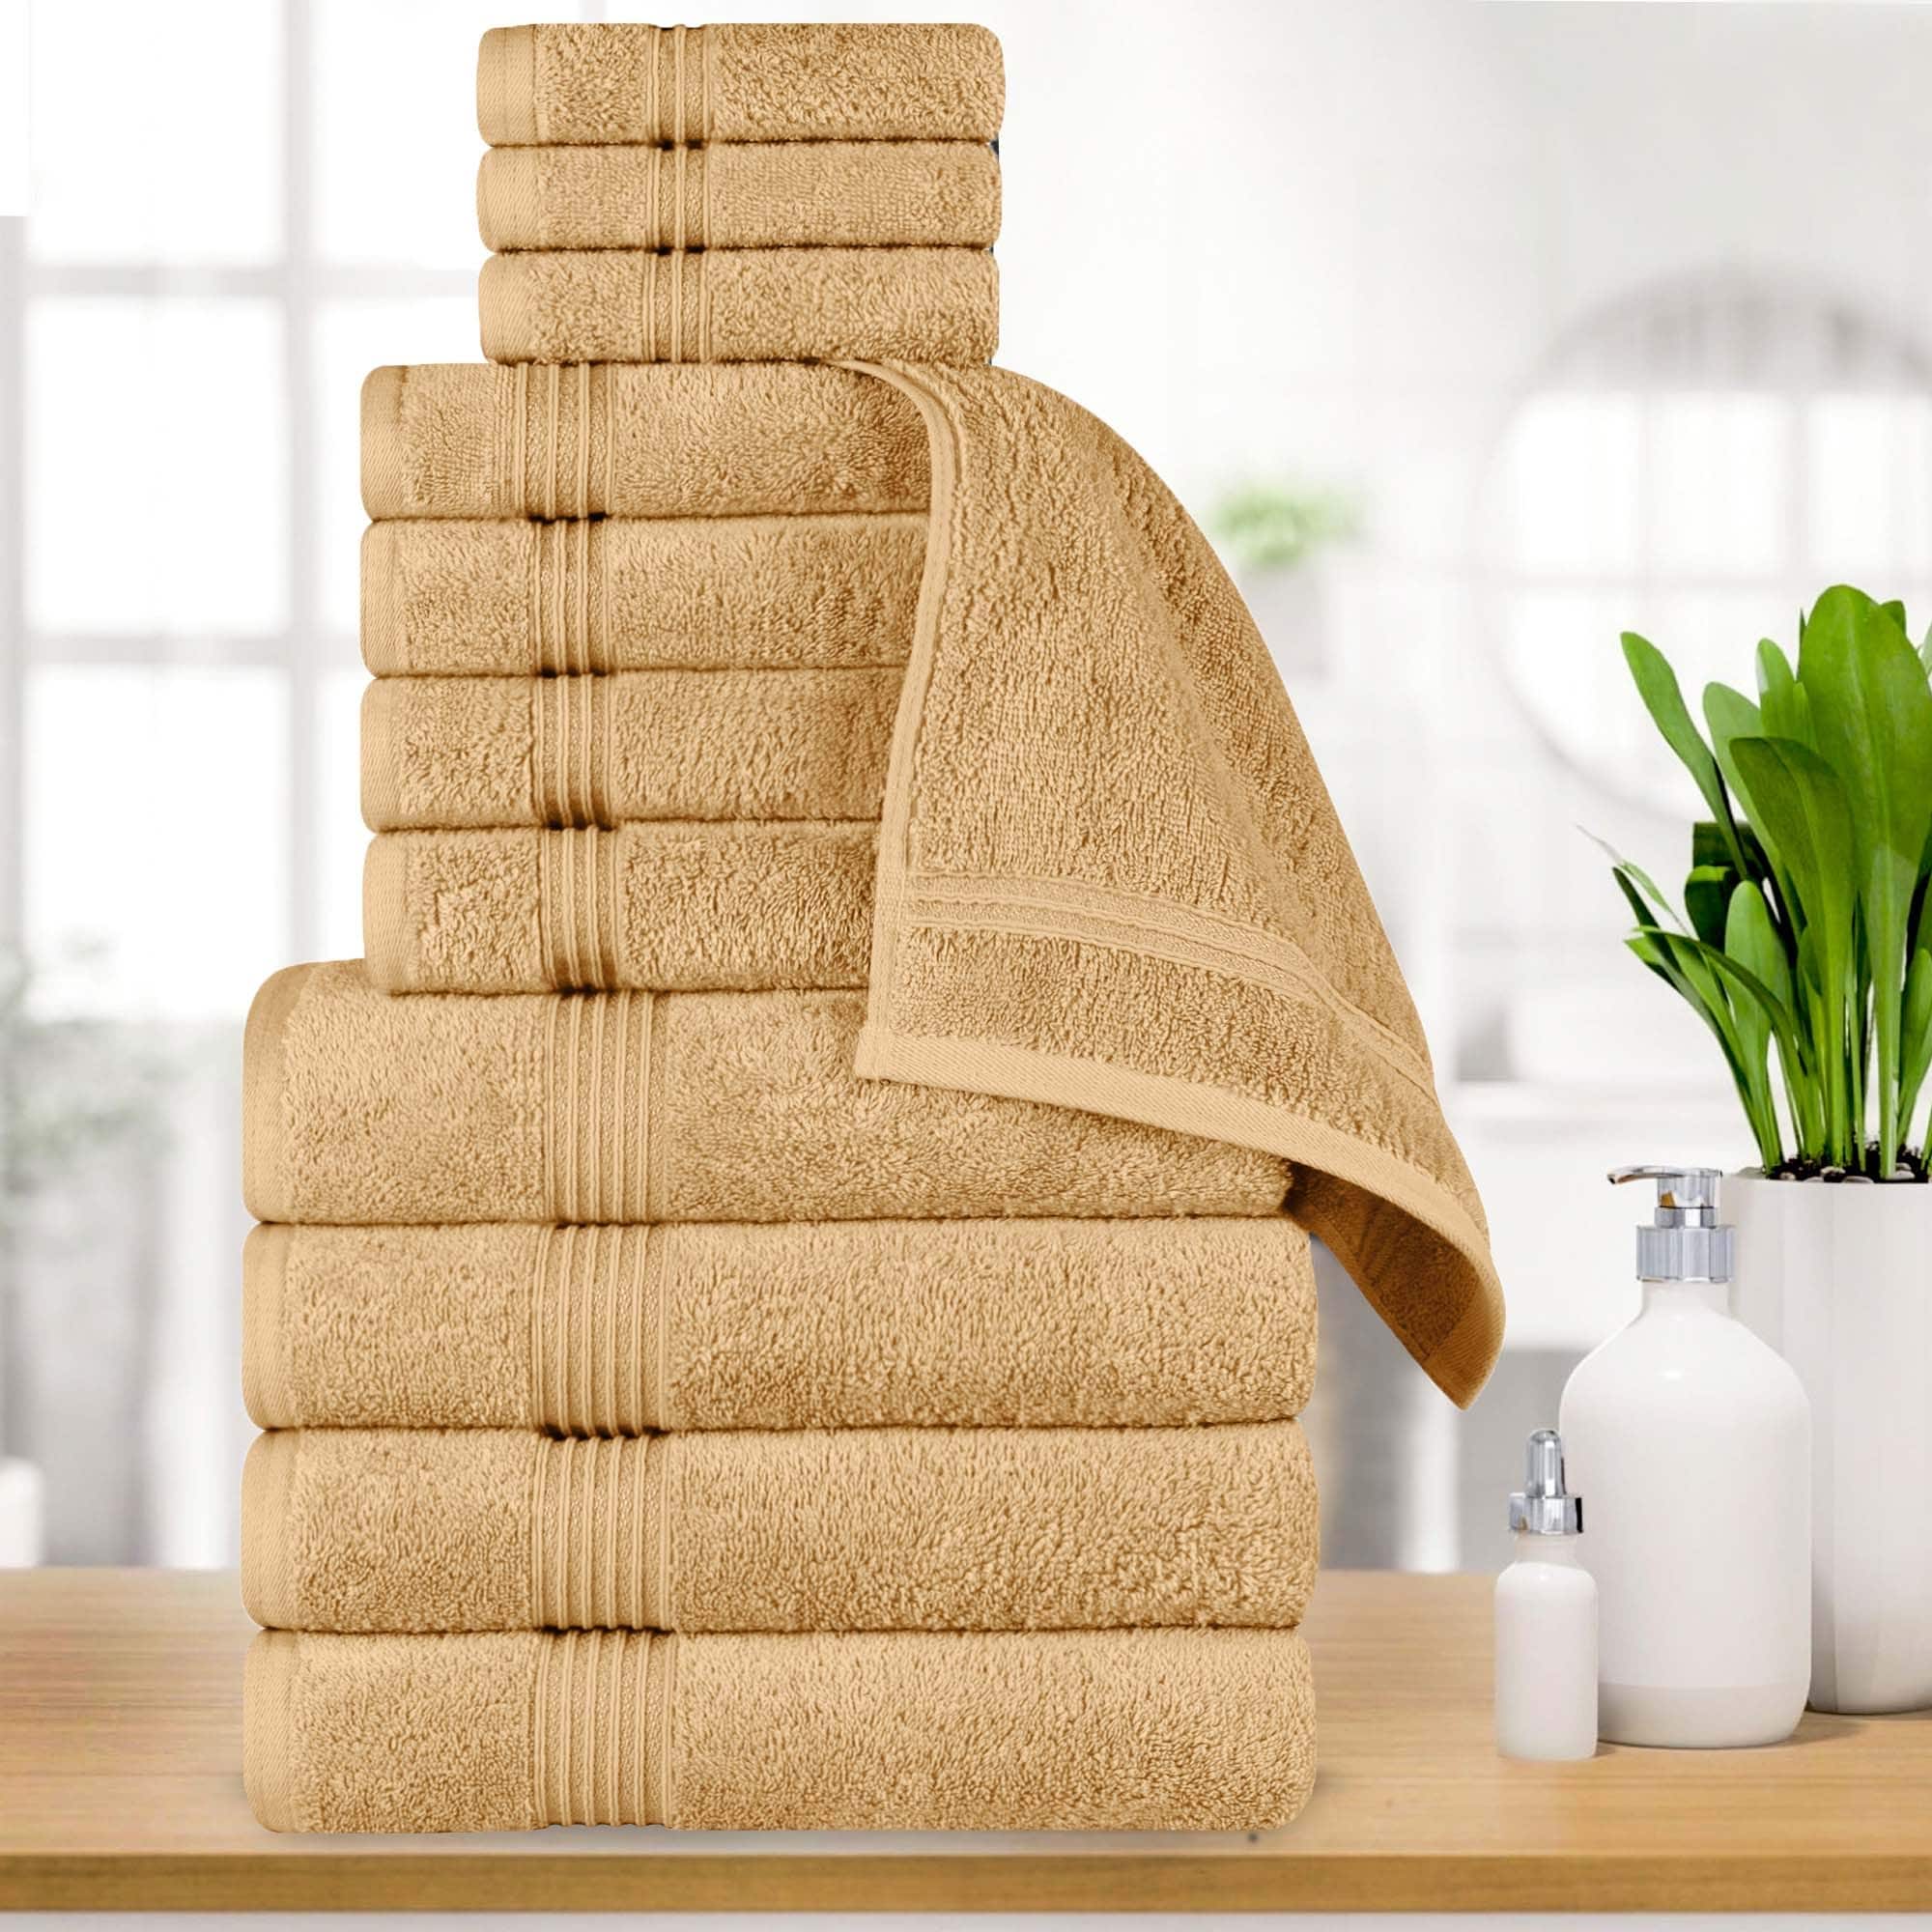 https://ak1.ostkcdn.com/images/products/is/images/direct/20b89d68393fd9e4255ce67f3d9dc15d30a6b4bc/Superior-Heritage-Egyptian-Cotton-Heavyweight-12-Piece-Bathroom-Towel-Set.jpg